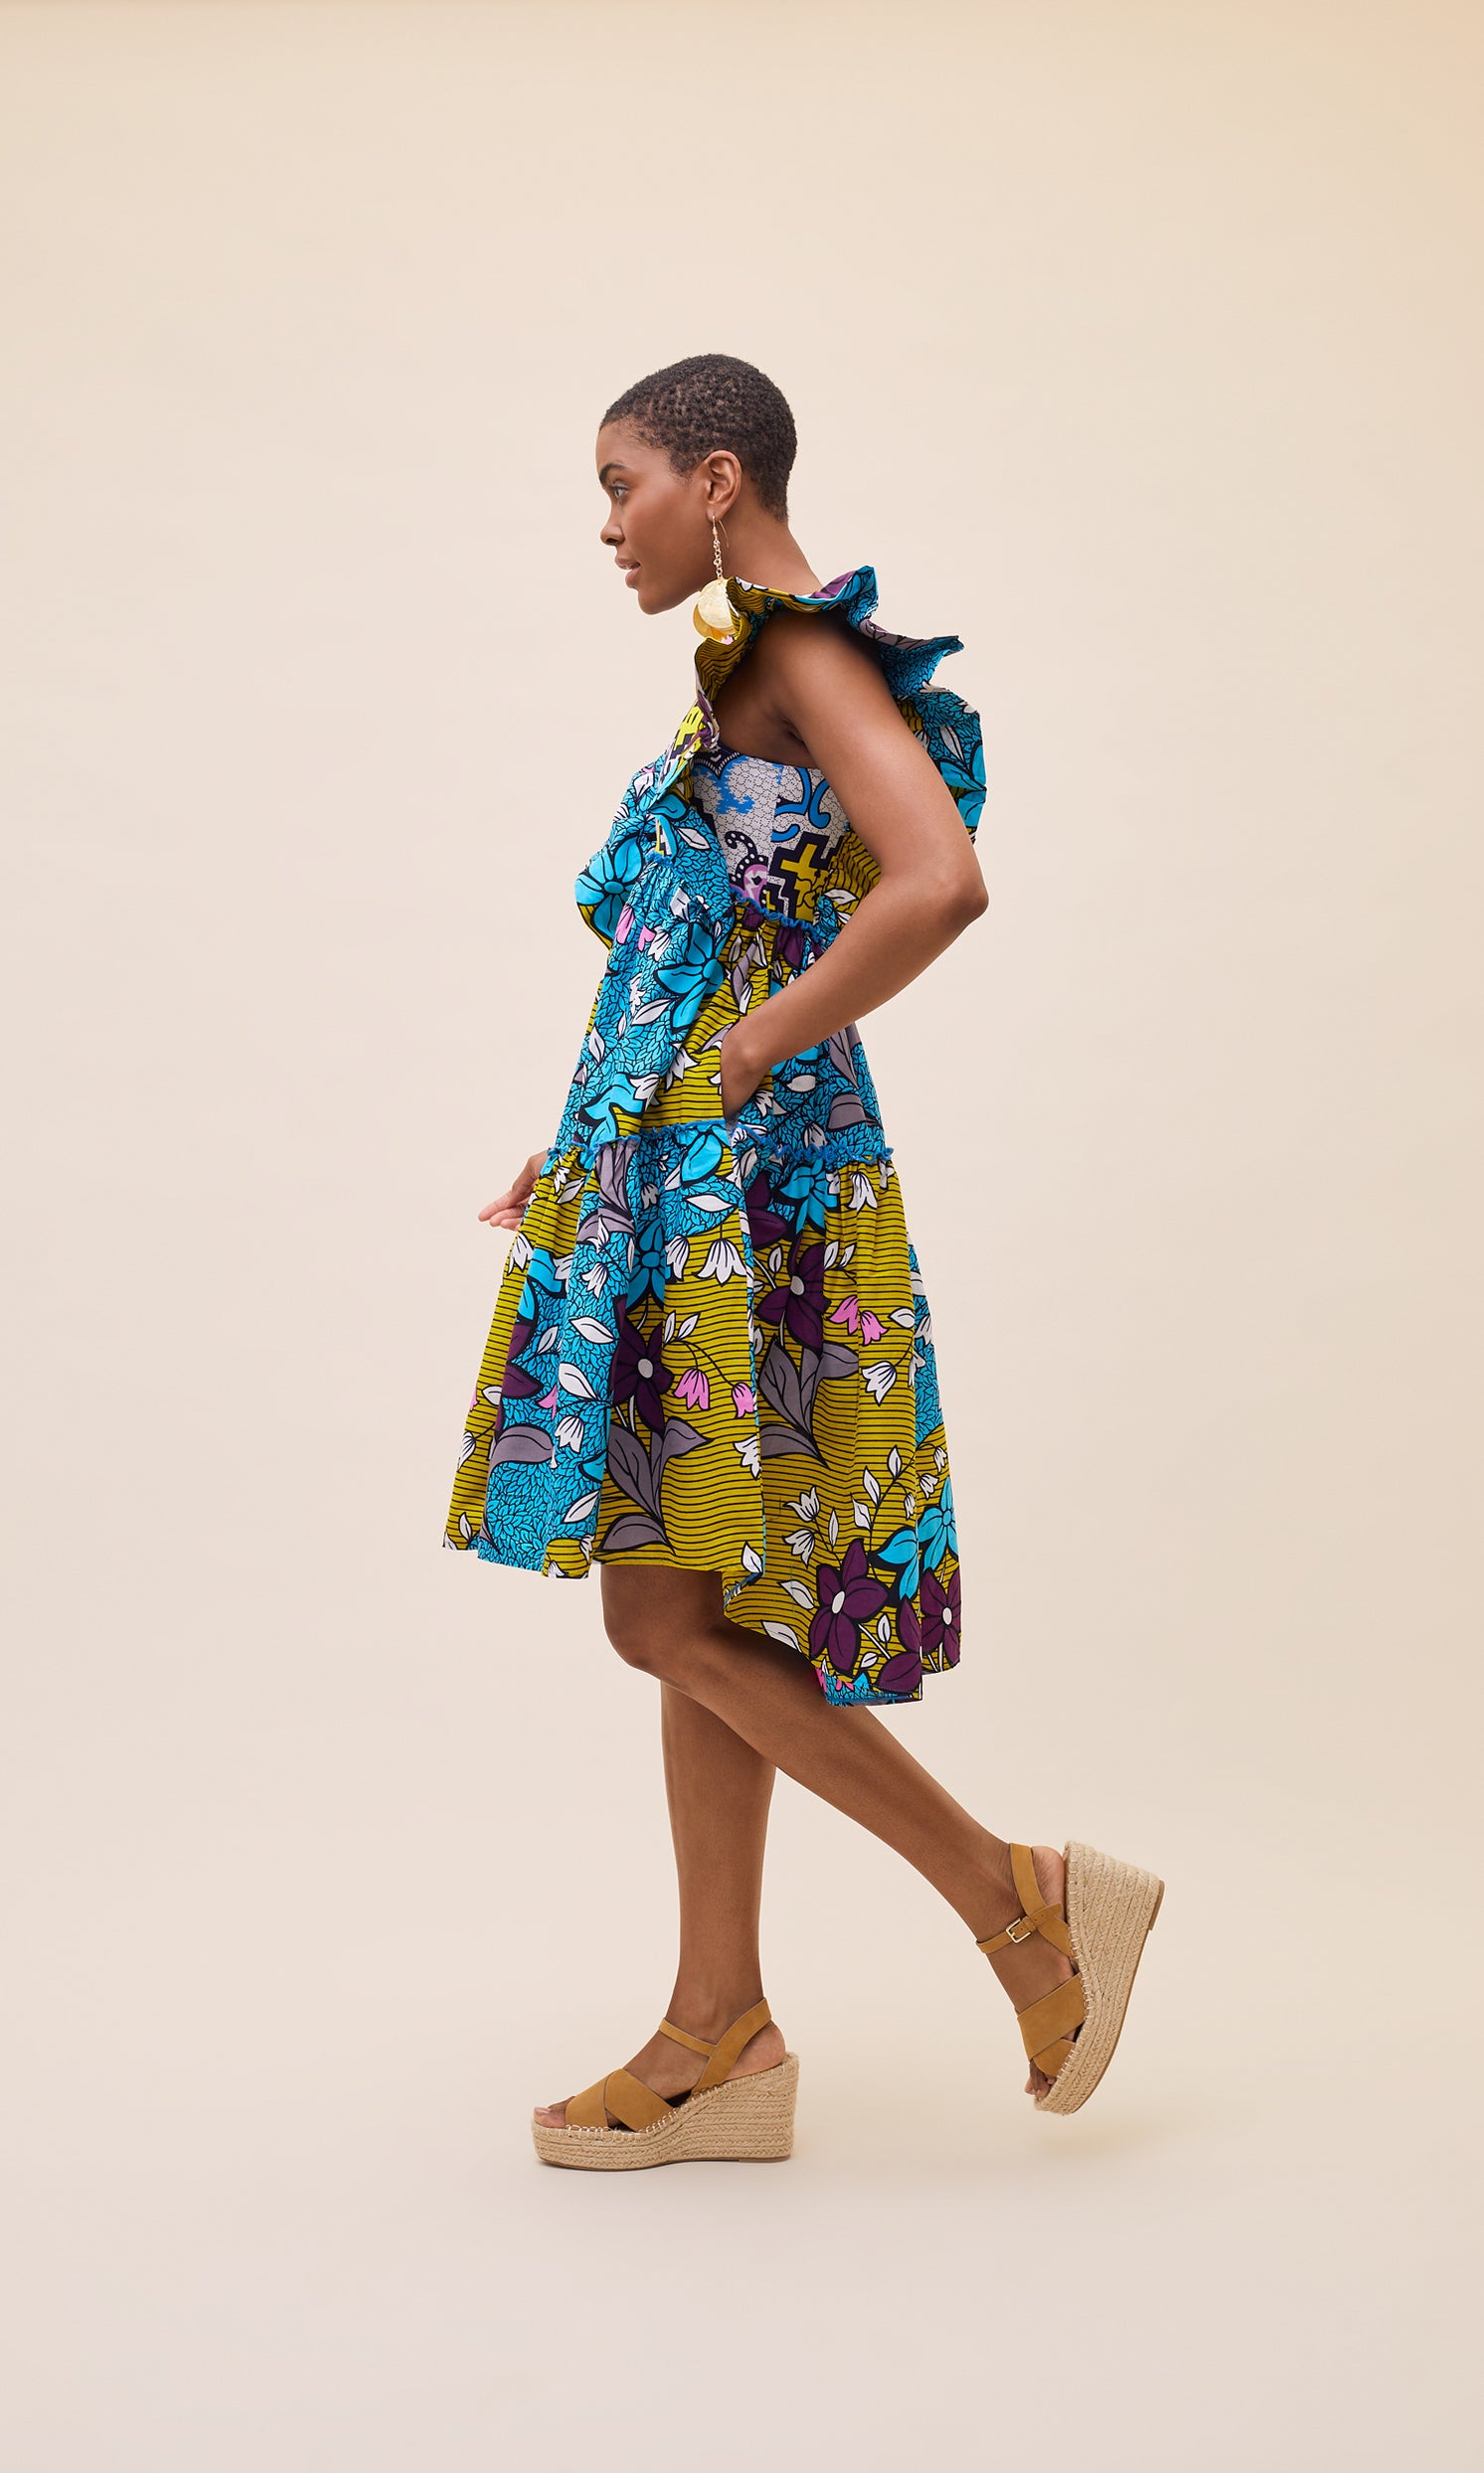 KIKI Clothing - Ready-to-wear contemporary African fashion